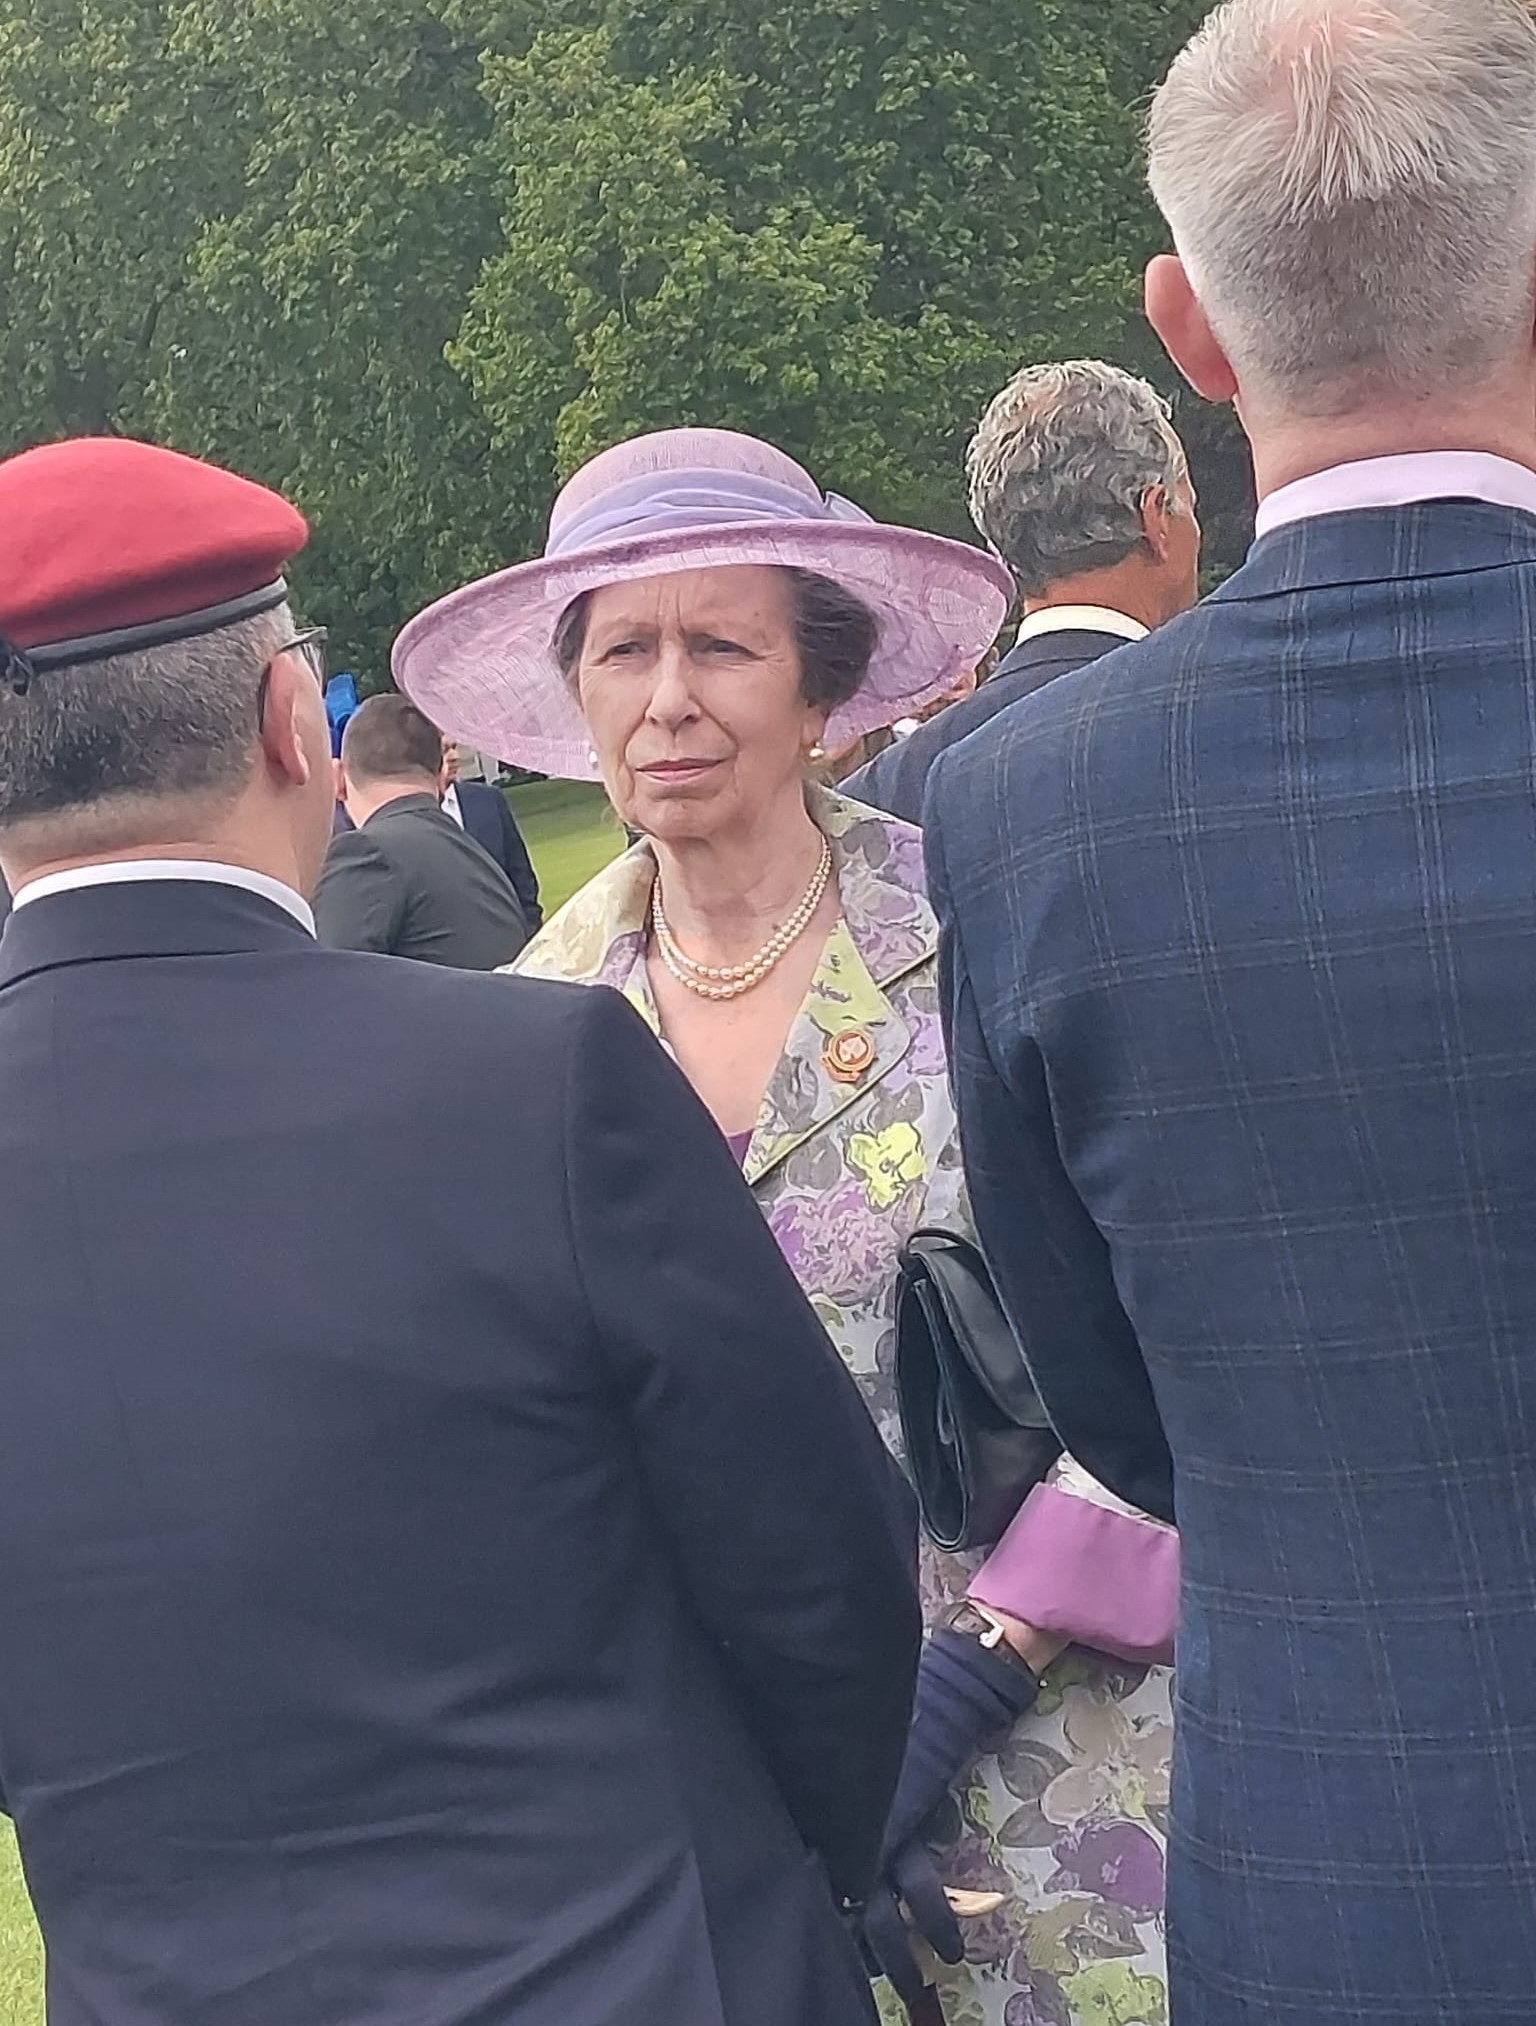 Anne, the Princess Royal and NFA patron, at the garden party.